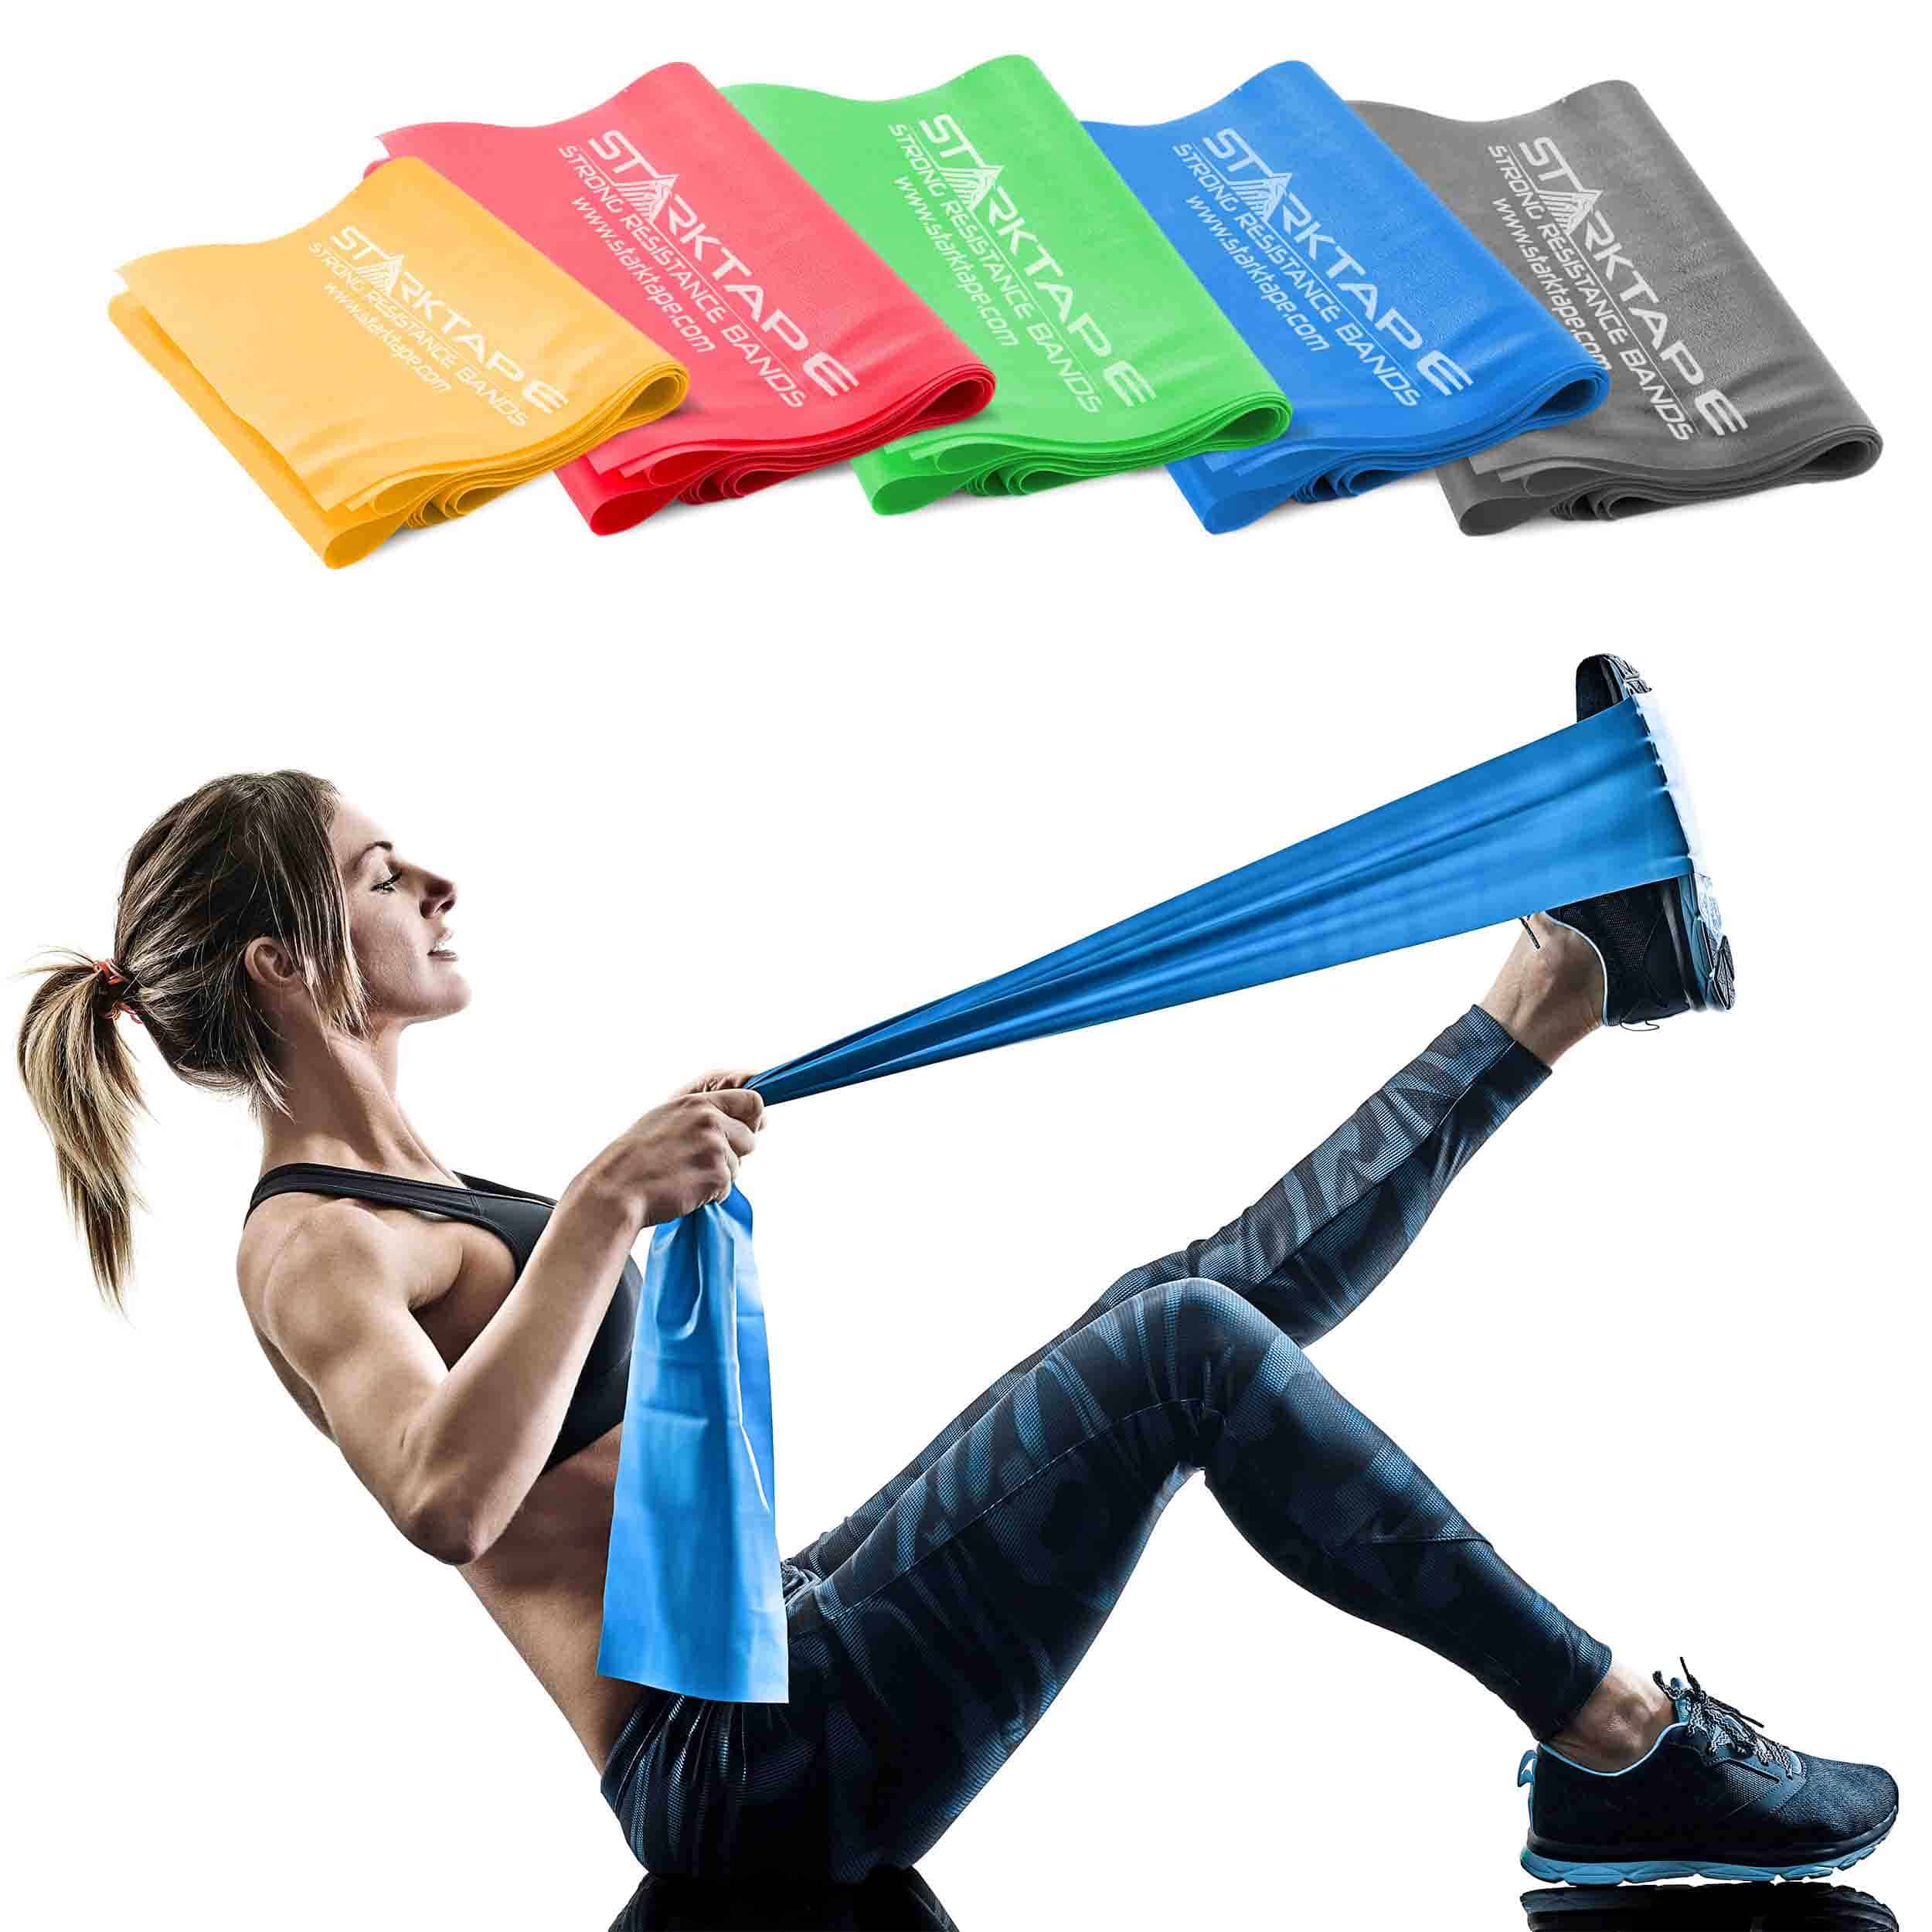 THERABAND Professional Non-Latex Resistance Bands - Ideal for